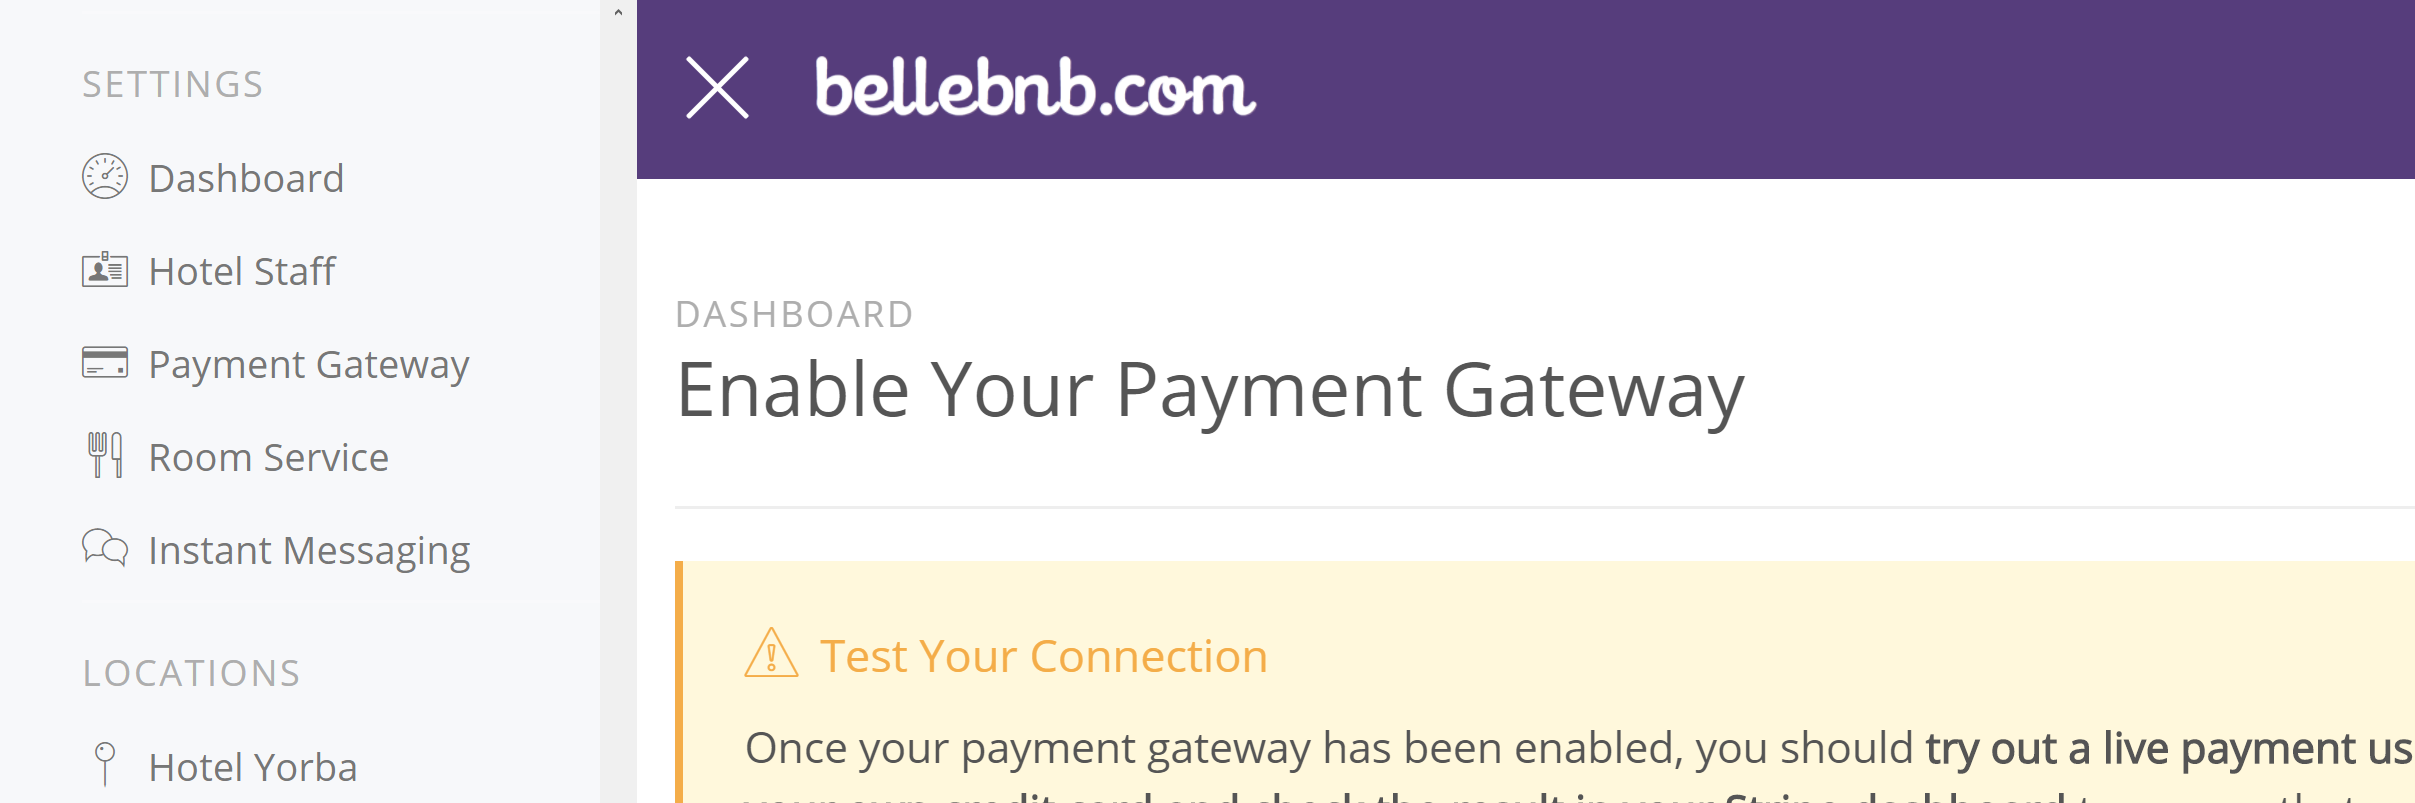 Payment Gateways Part I: Bellebnb Concepts You can connect your Payment Gateway to process live credit card payments directly from your Front Desk manager. Before you do this, you should be familiar with a few definitions and concepts found in this blog post. Hotel Management Software in the Cloud